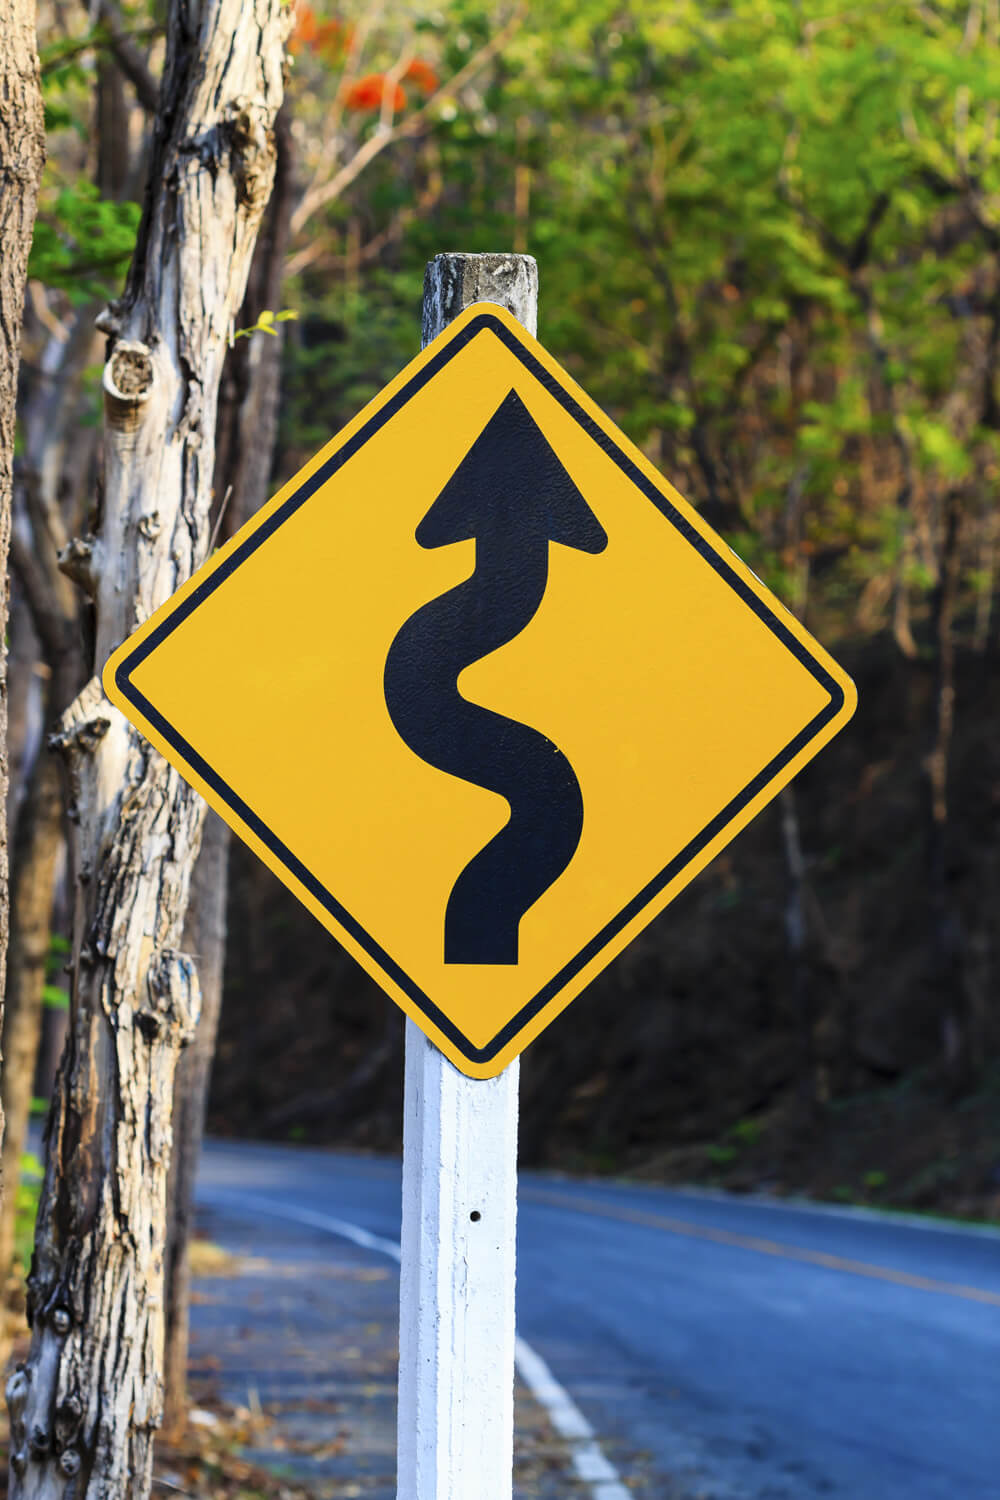 Winding Road Sign: What Does it Mean?